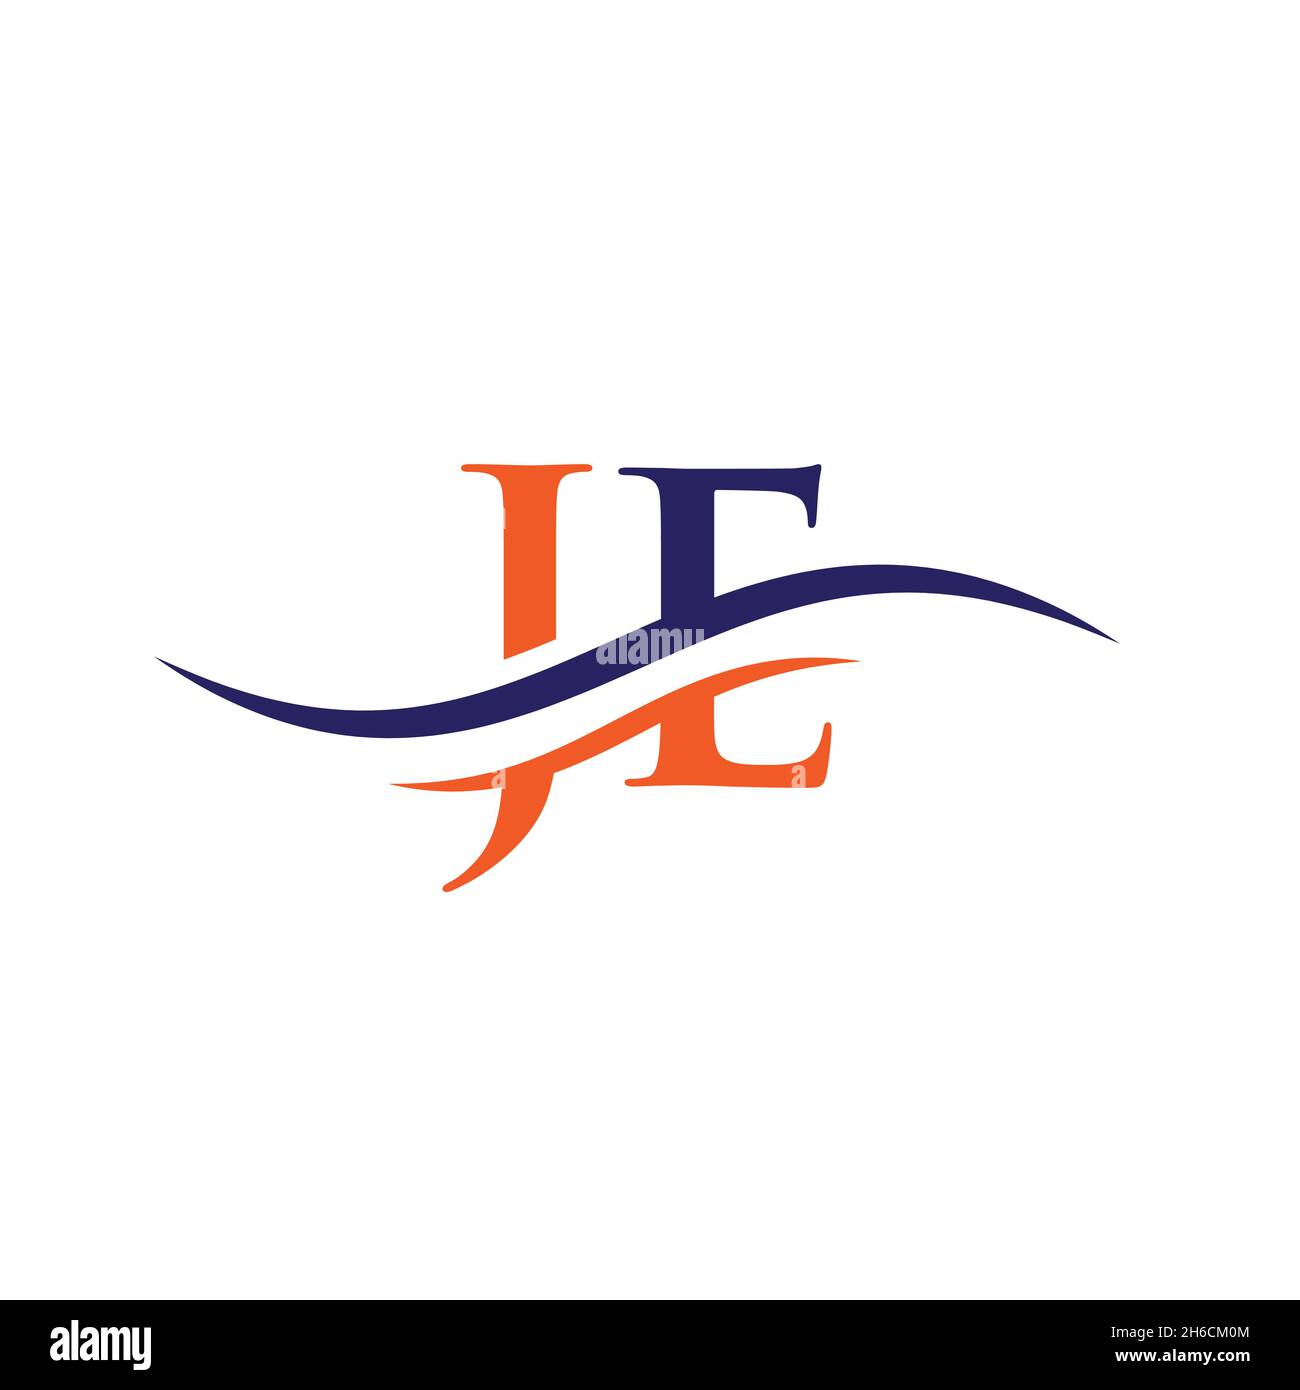 JE Letter Linked Logo for business and company identity. Initial Letter JE Logo Vector Template. Stock Vector